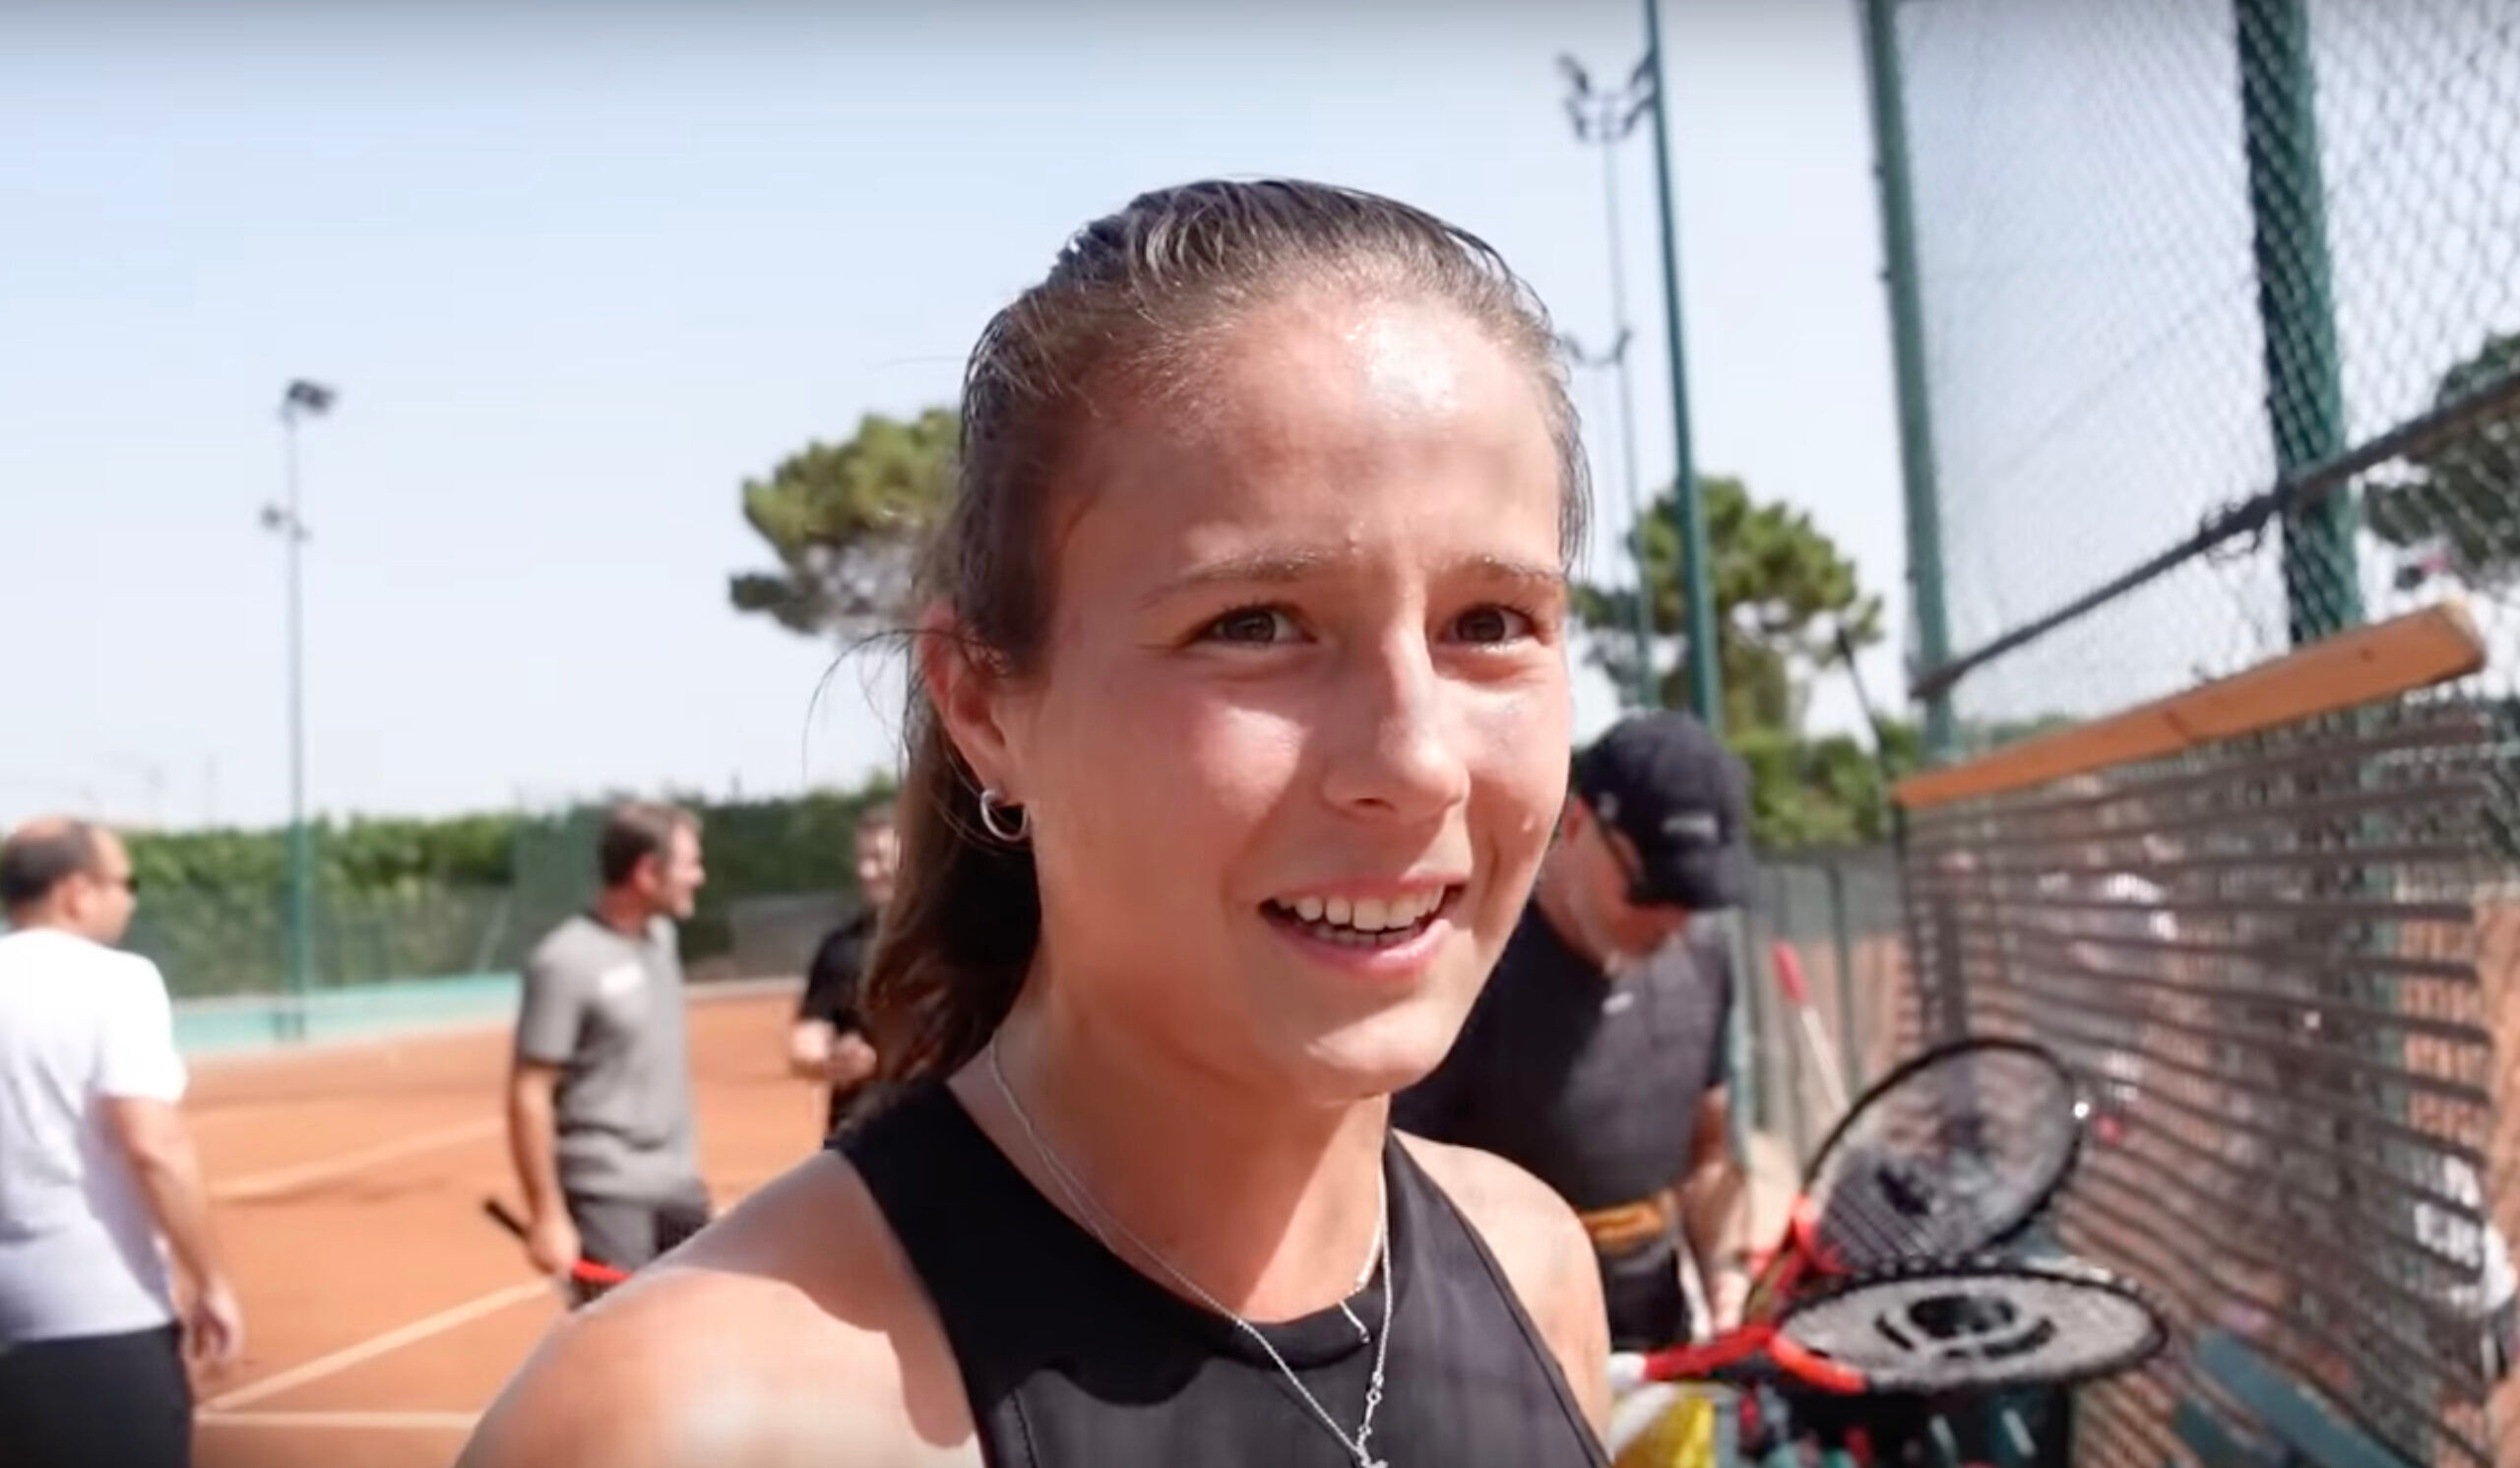 Russian tennis champ Daria Kasatkina worries about going home after coming out